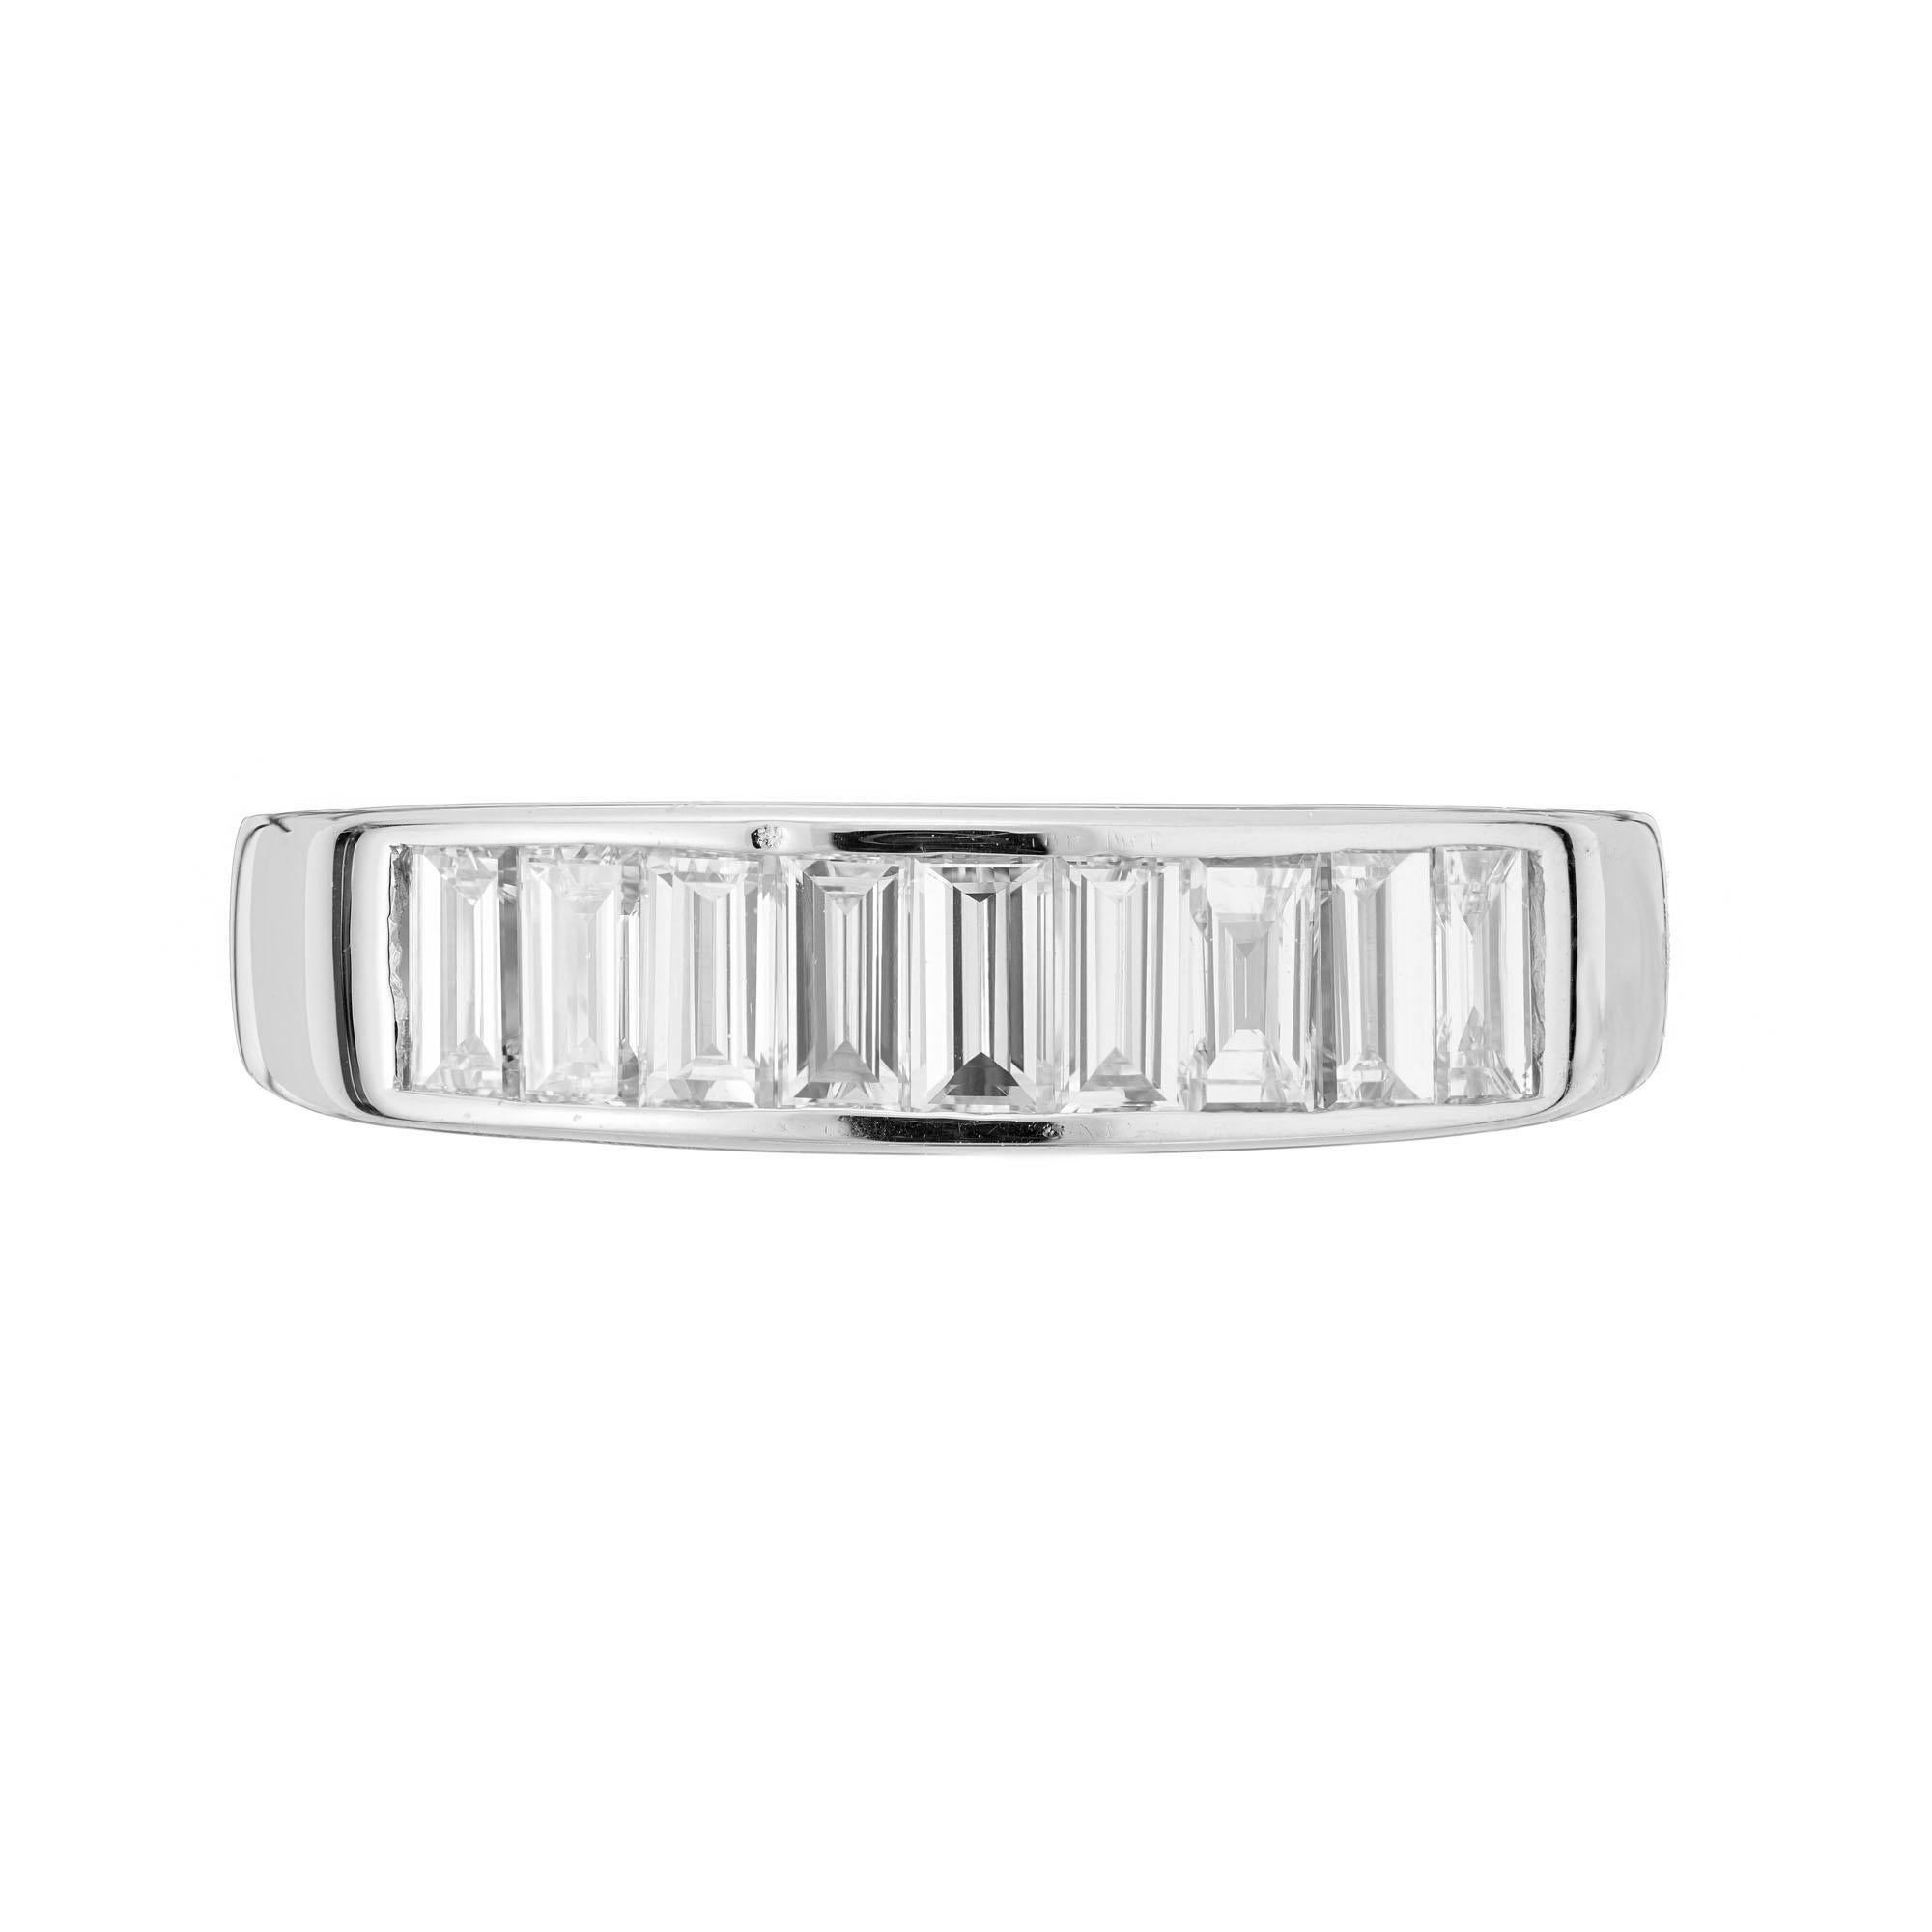 Diamond wedding band ring. 9 emerald cut Channel diamonds in a 18k white gold setting. Slightly raised top. 

9 Emerald cut diamonds, approx. total weight .93cts, H, VS1 – VS2 
Size 7.5 and sizable 
18k white gold
Tested: 18k
 Stamped: 750